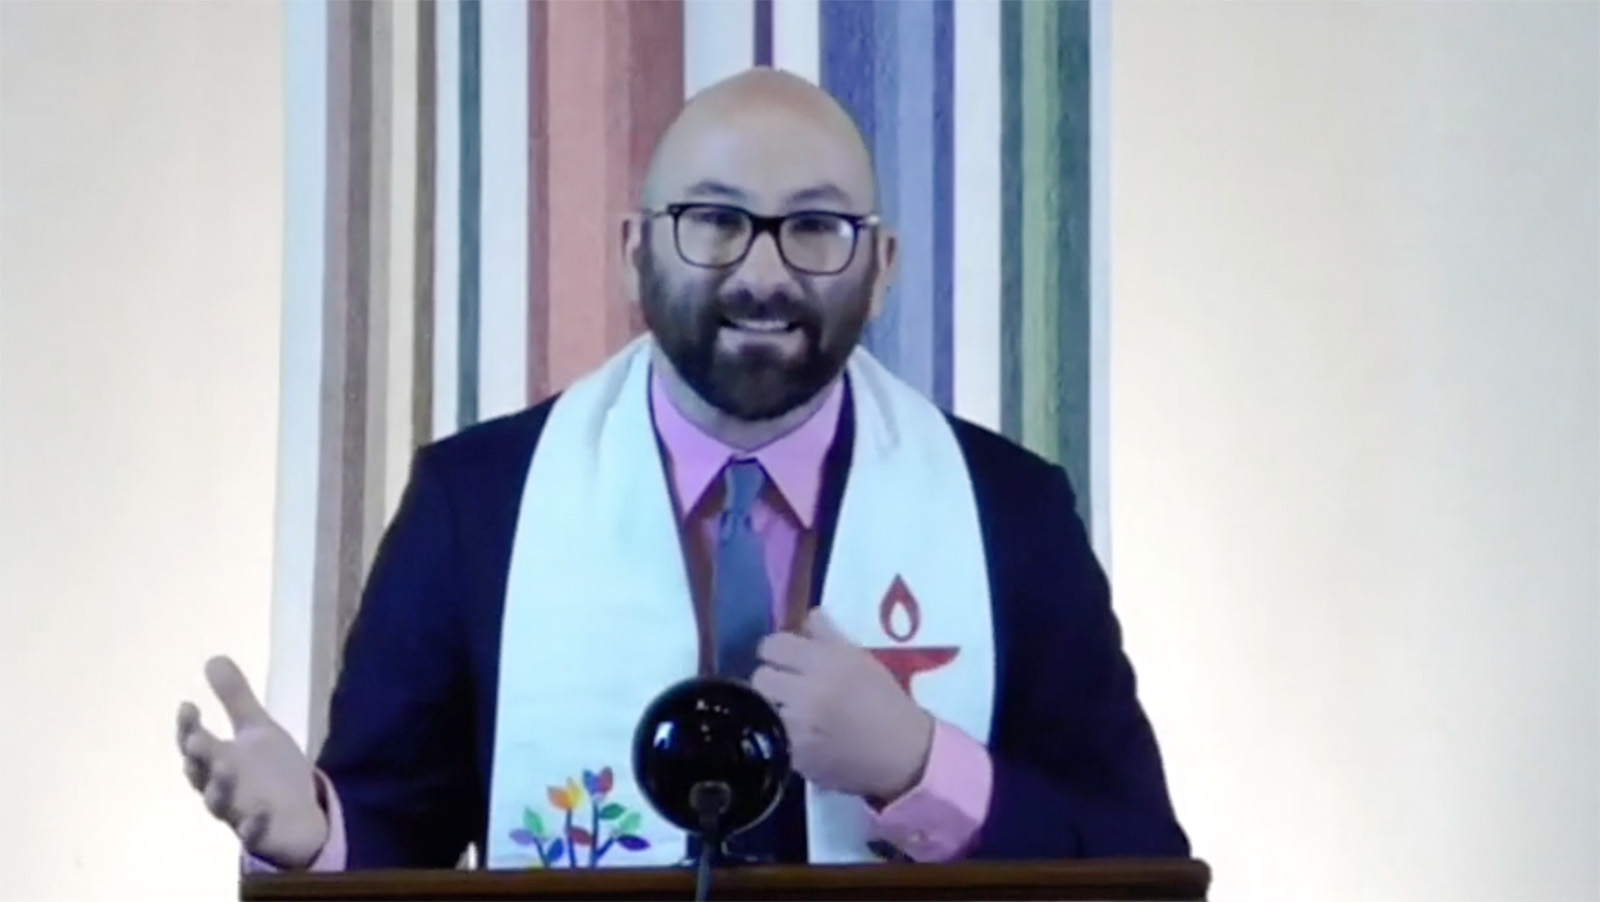 The Rev. Jason Lydon speaks during a virtual service of Second Unitarian Church of Chicago on Jan. 24, 2021. Video screengrab